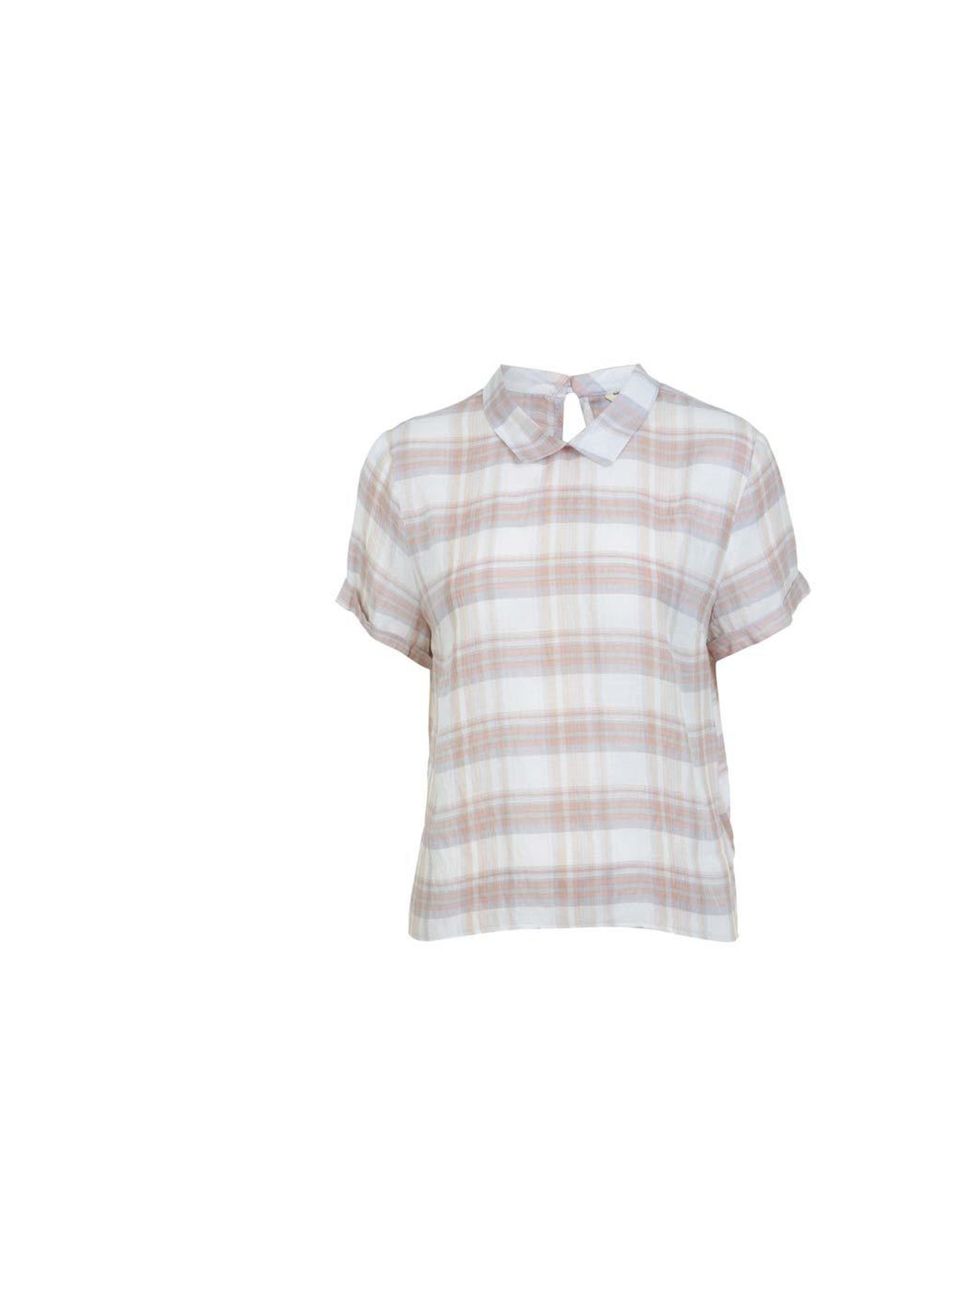 <p>Designer Phoebe Sing will wear this pastel checked top with skinny jeans and a pair of chunky-heeled black boots come autumn.</p><p><a href="http://www.missselfridge.com/en/msuk/product/clothing-299047/tops-299061/pastel-check-tee-2051817?bi=1&ps=200">